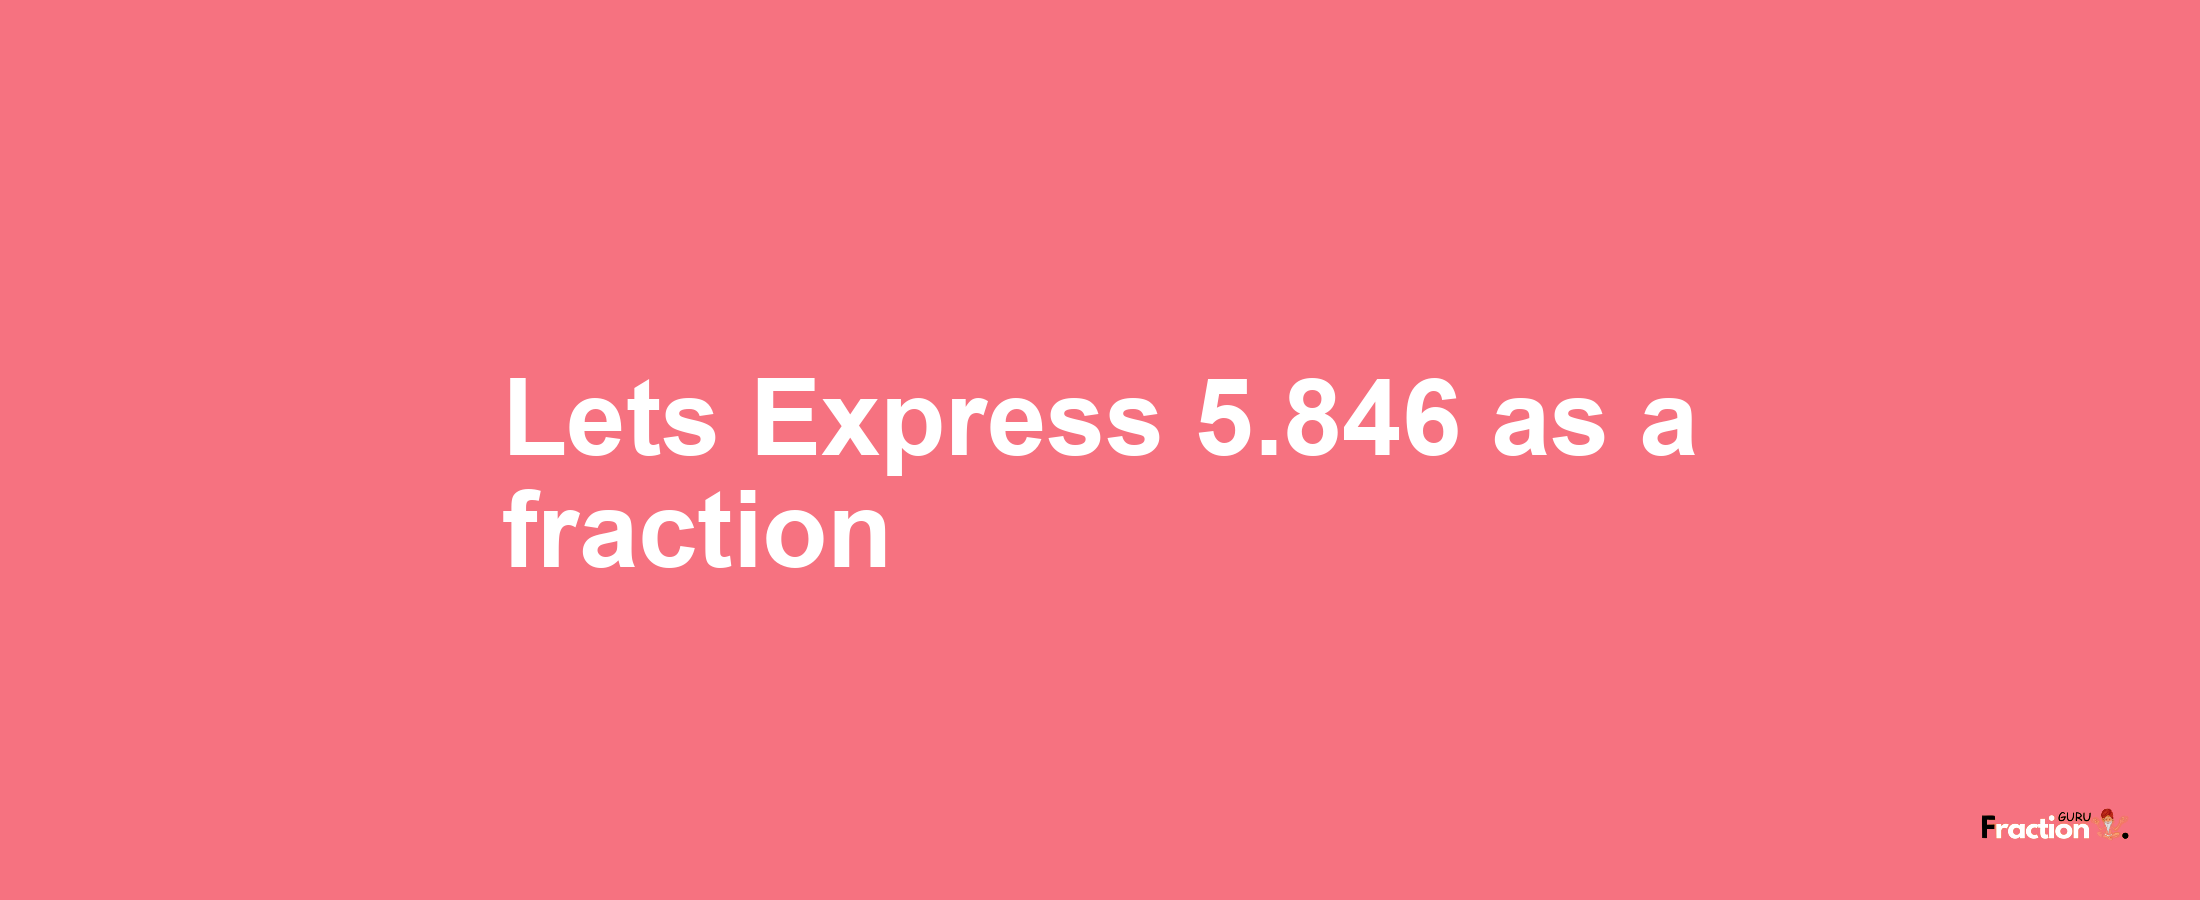 Lets Express 5.846 as afraction